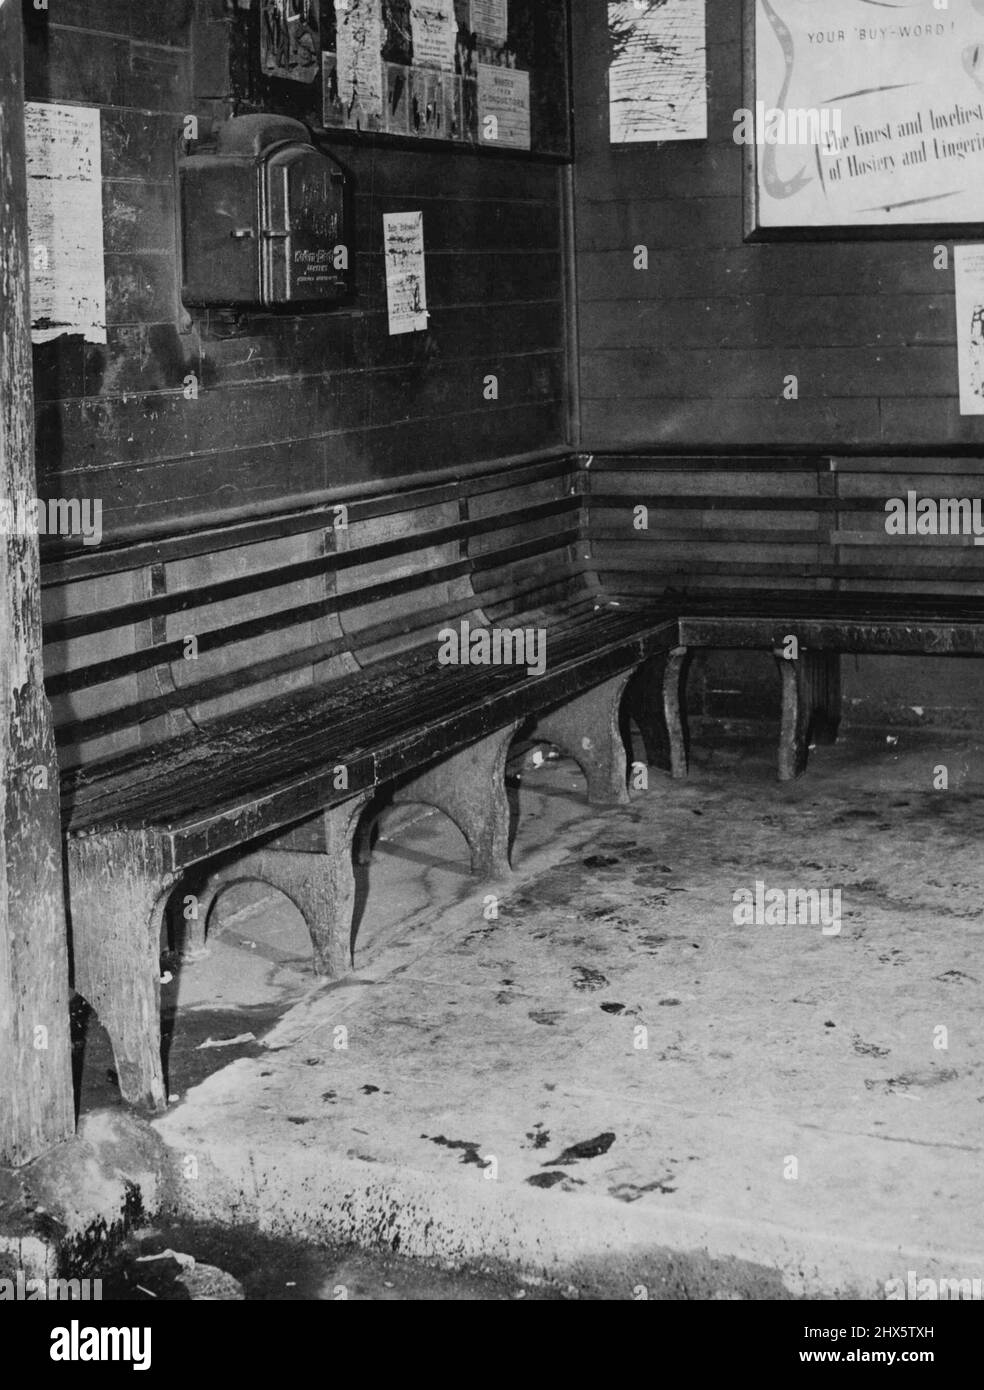 Tram Shed where Frederick box was bashed leg *****. August 17, 1949. Stock Photo